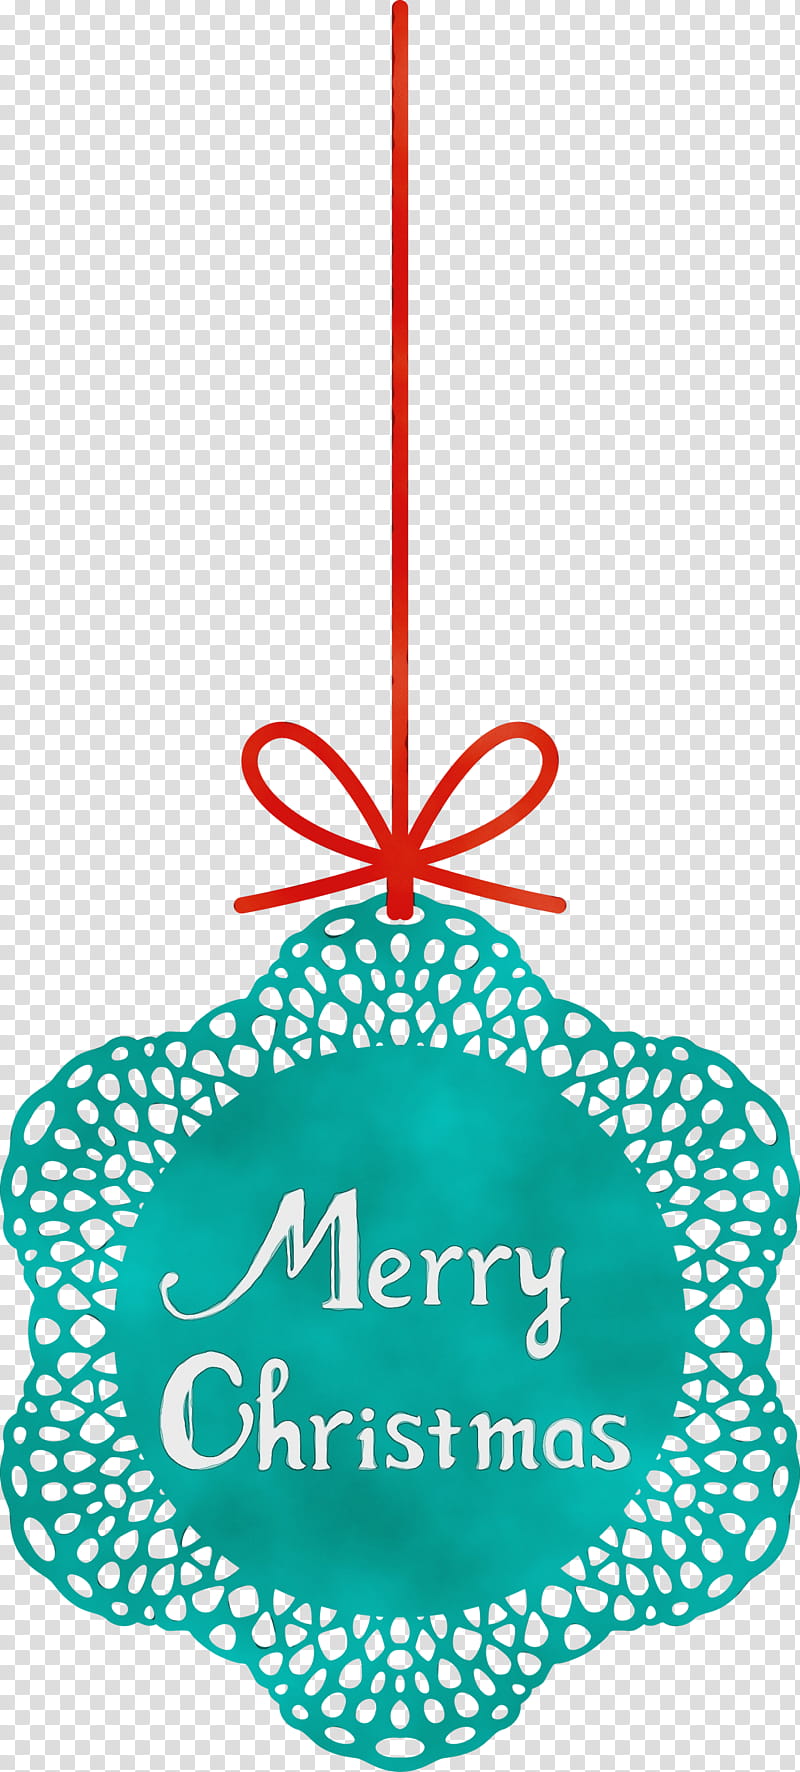 Polka dot, Christmas Fonts, Merry Christmas Fonts, Watercolor, Paint, Wet Ink, Turquoise, Holiday Ornament transparent background PNG clipart